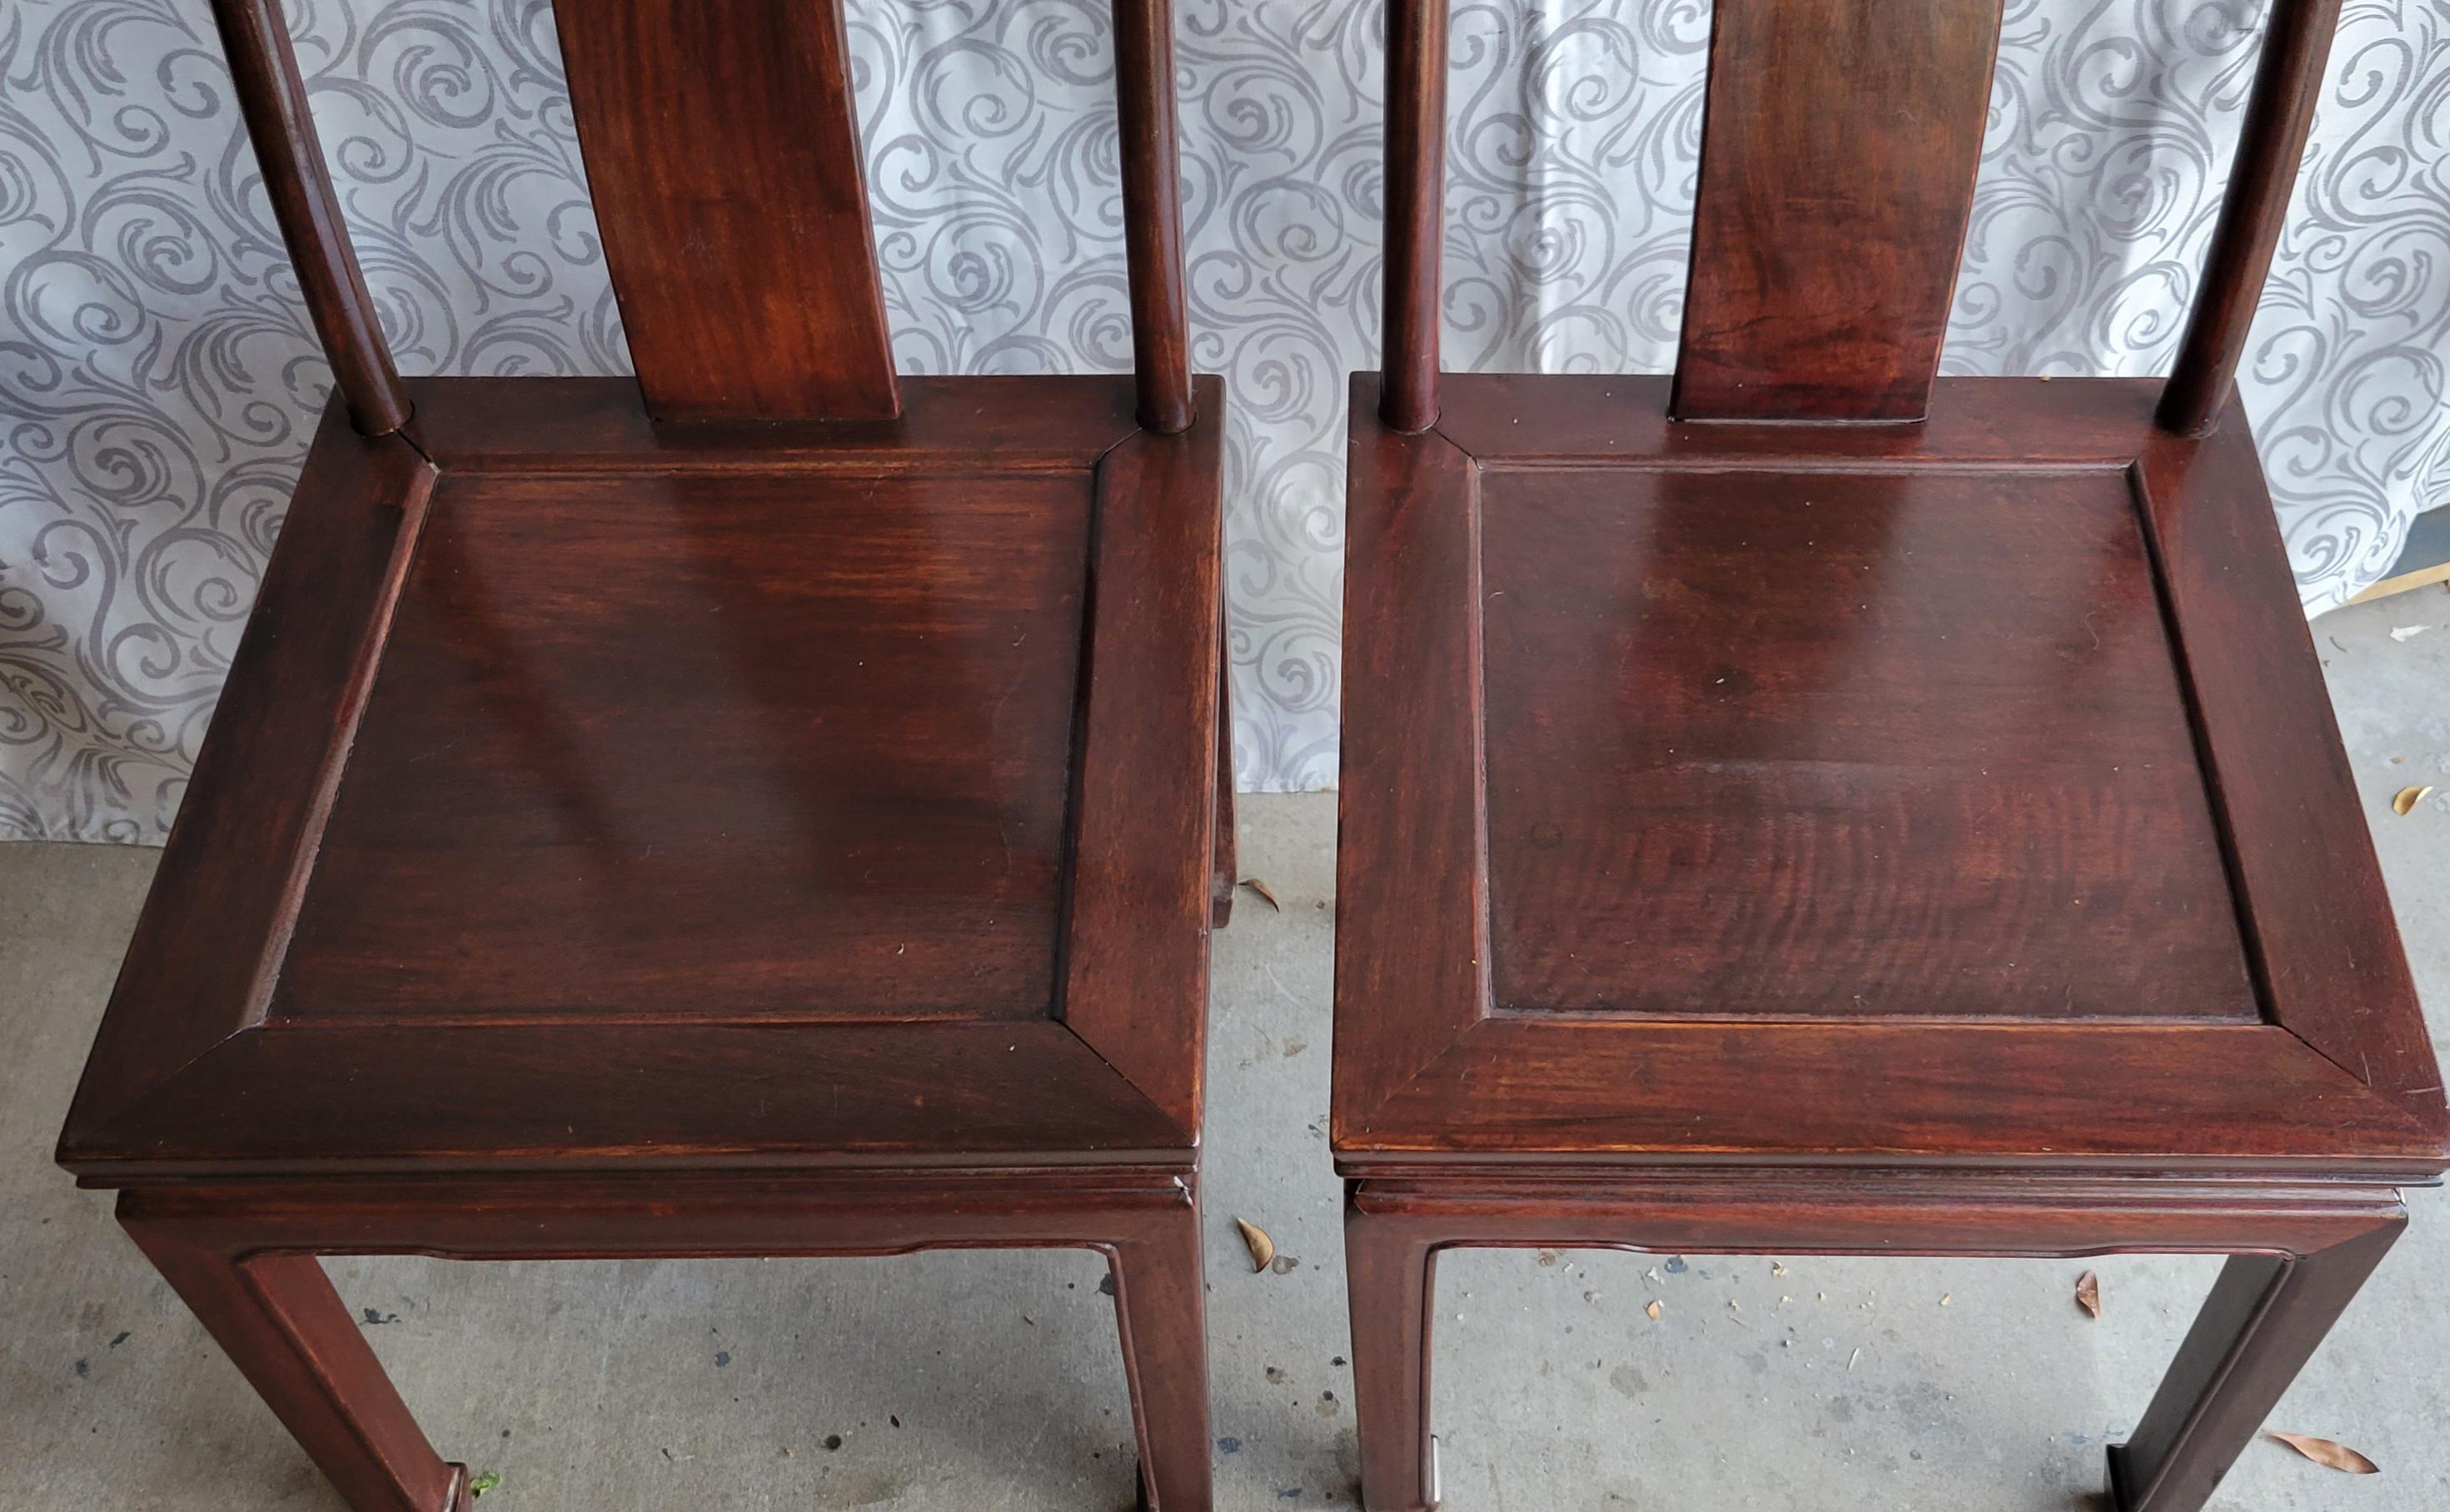 A set of 2 vintage solid wood side chairs in very good condition. We estimate that it was made sometime in the mid-20th century.  
Each chair has a delicate hummingbird and cherry blossom carving.  
The chairs have no maker's identifications, but